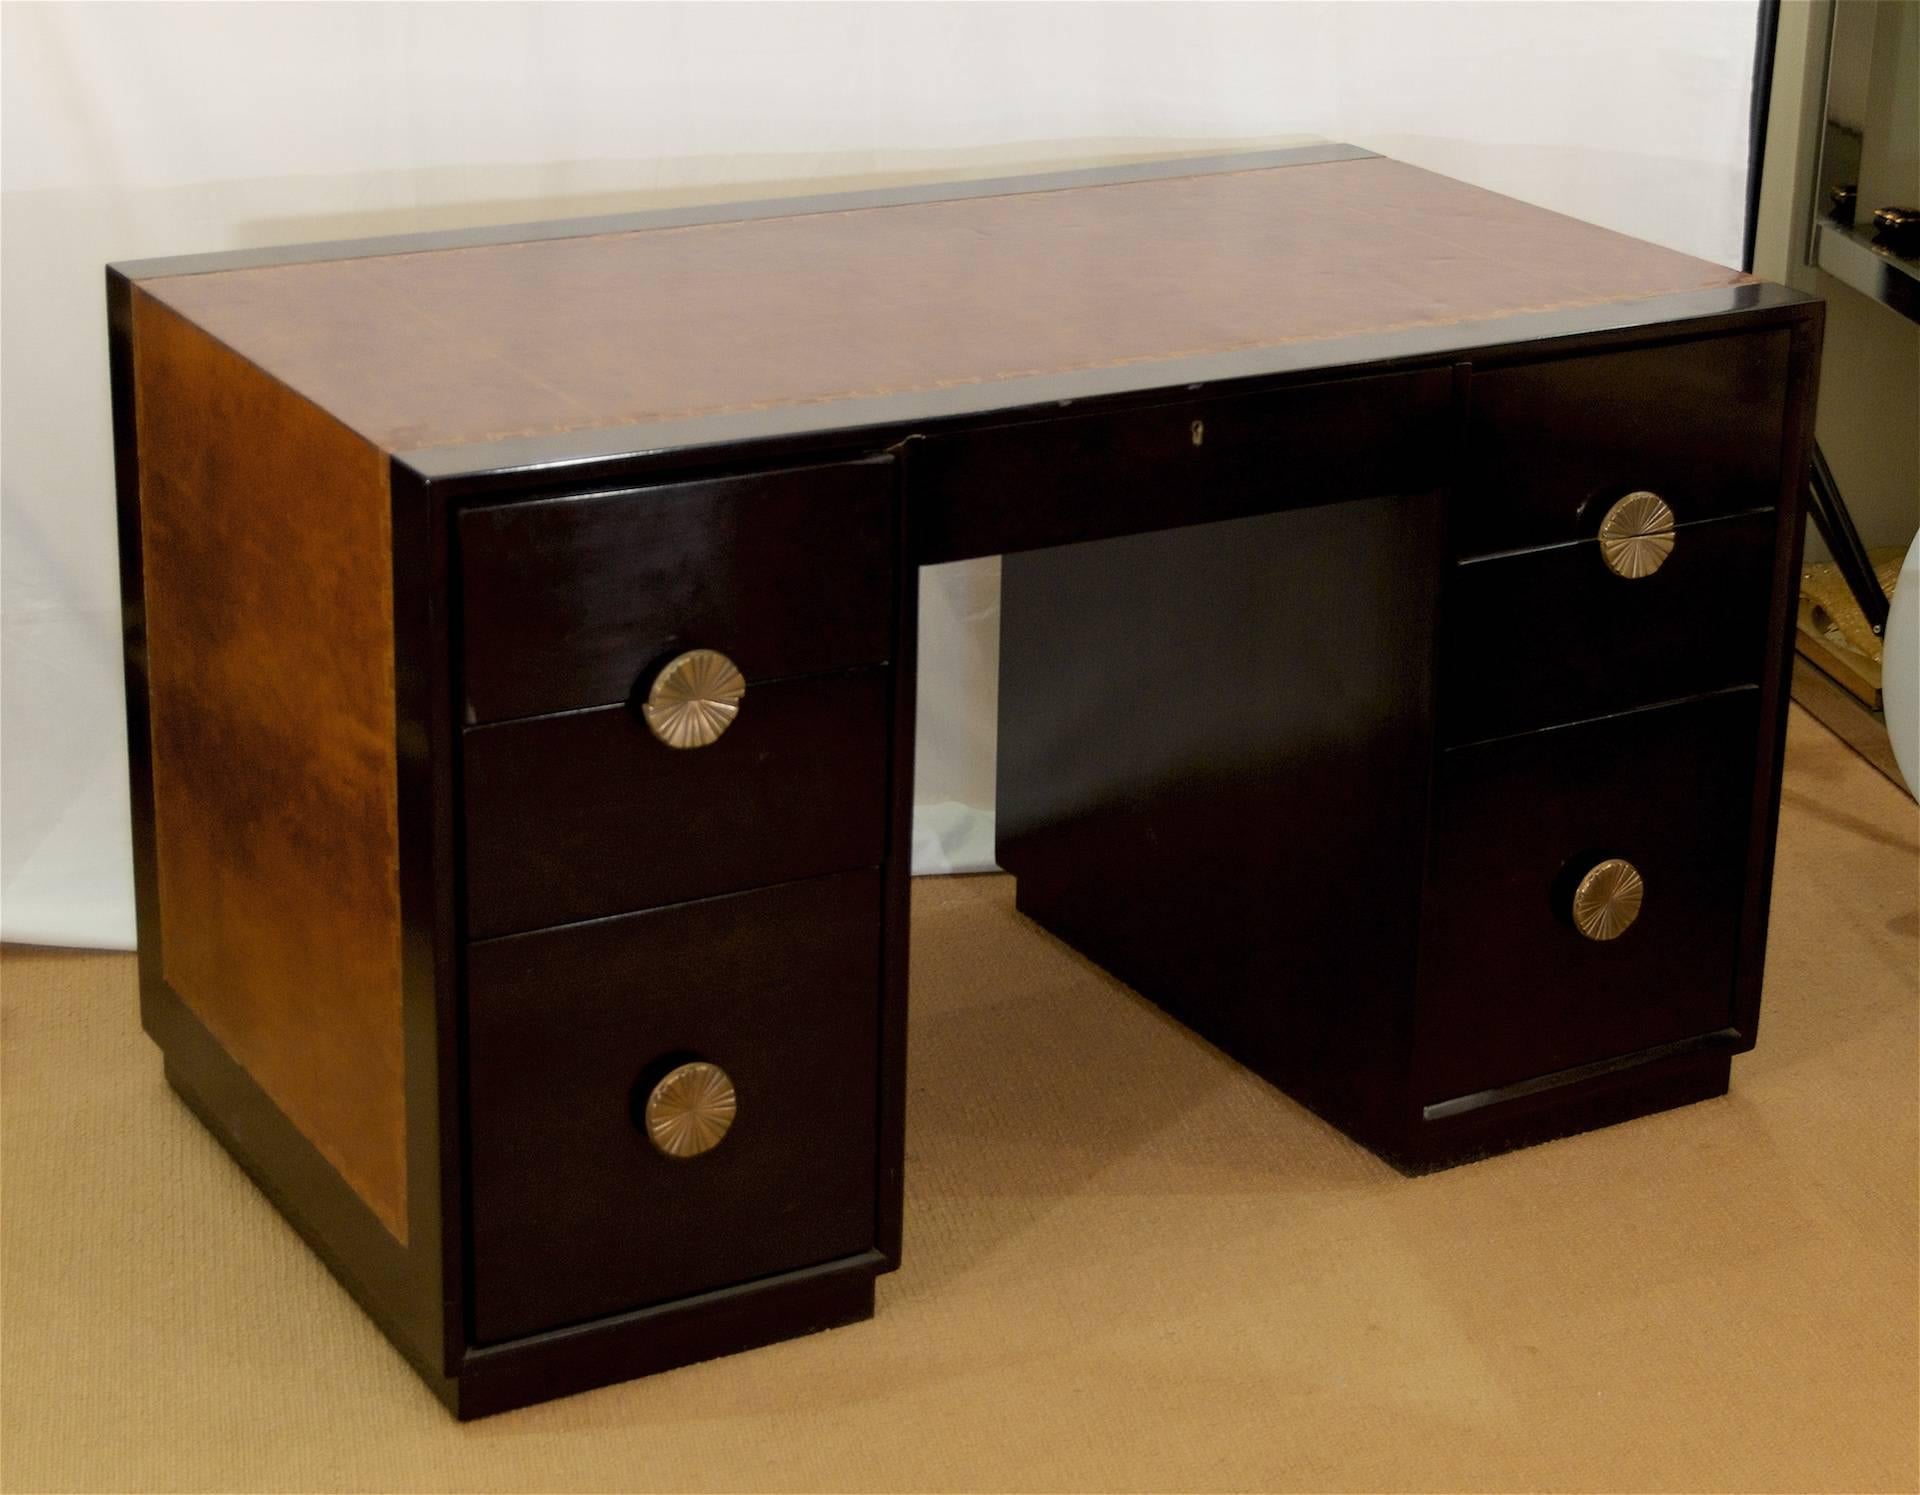 Mid-Century ebonized desk by Charak Modern with camel colored leather top and embossed Greek key detailing, attributed to Tommy Parzinger. Each of the six drawers have substantially sized sunburst brass pulls. Finished on all sides, obverse of desk